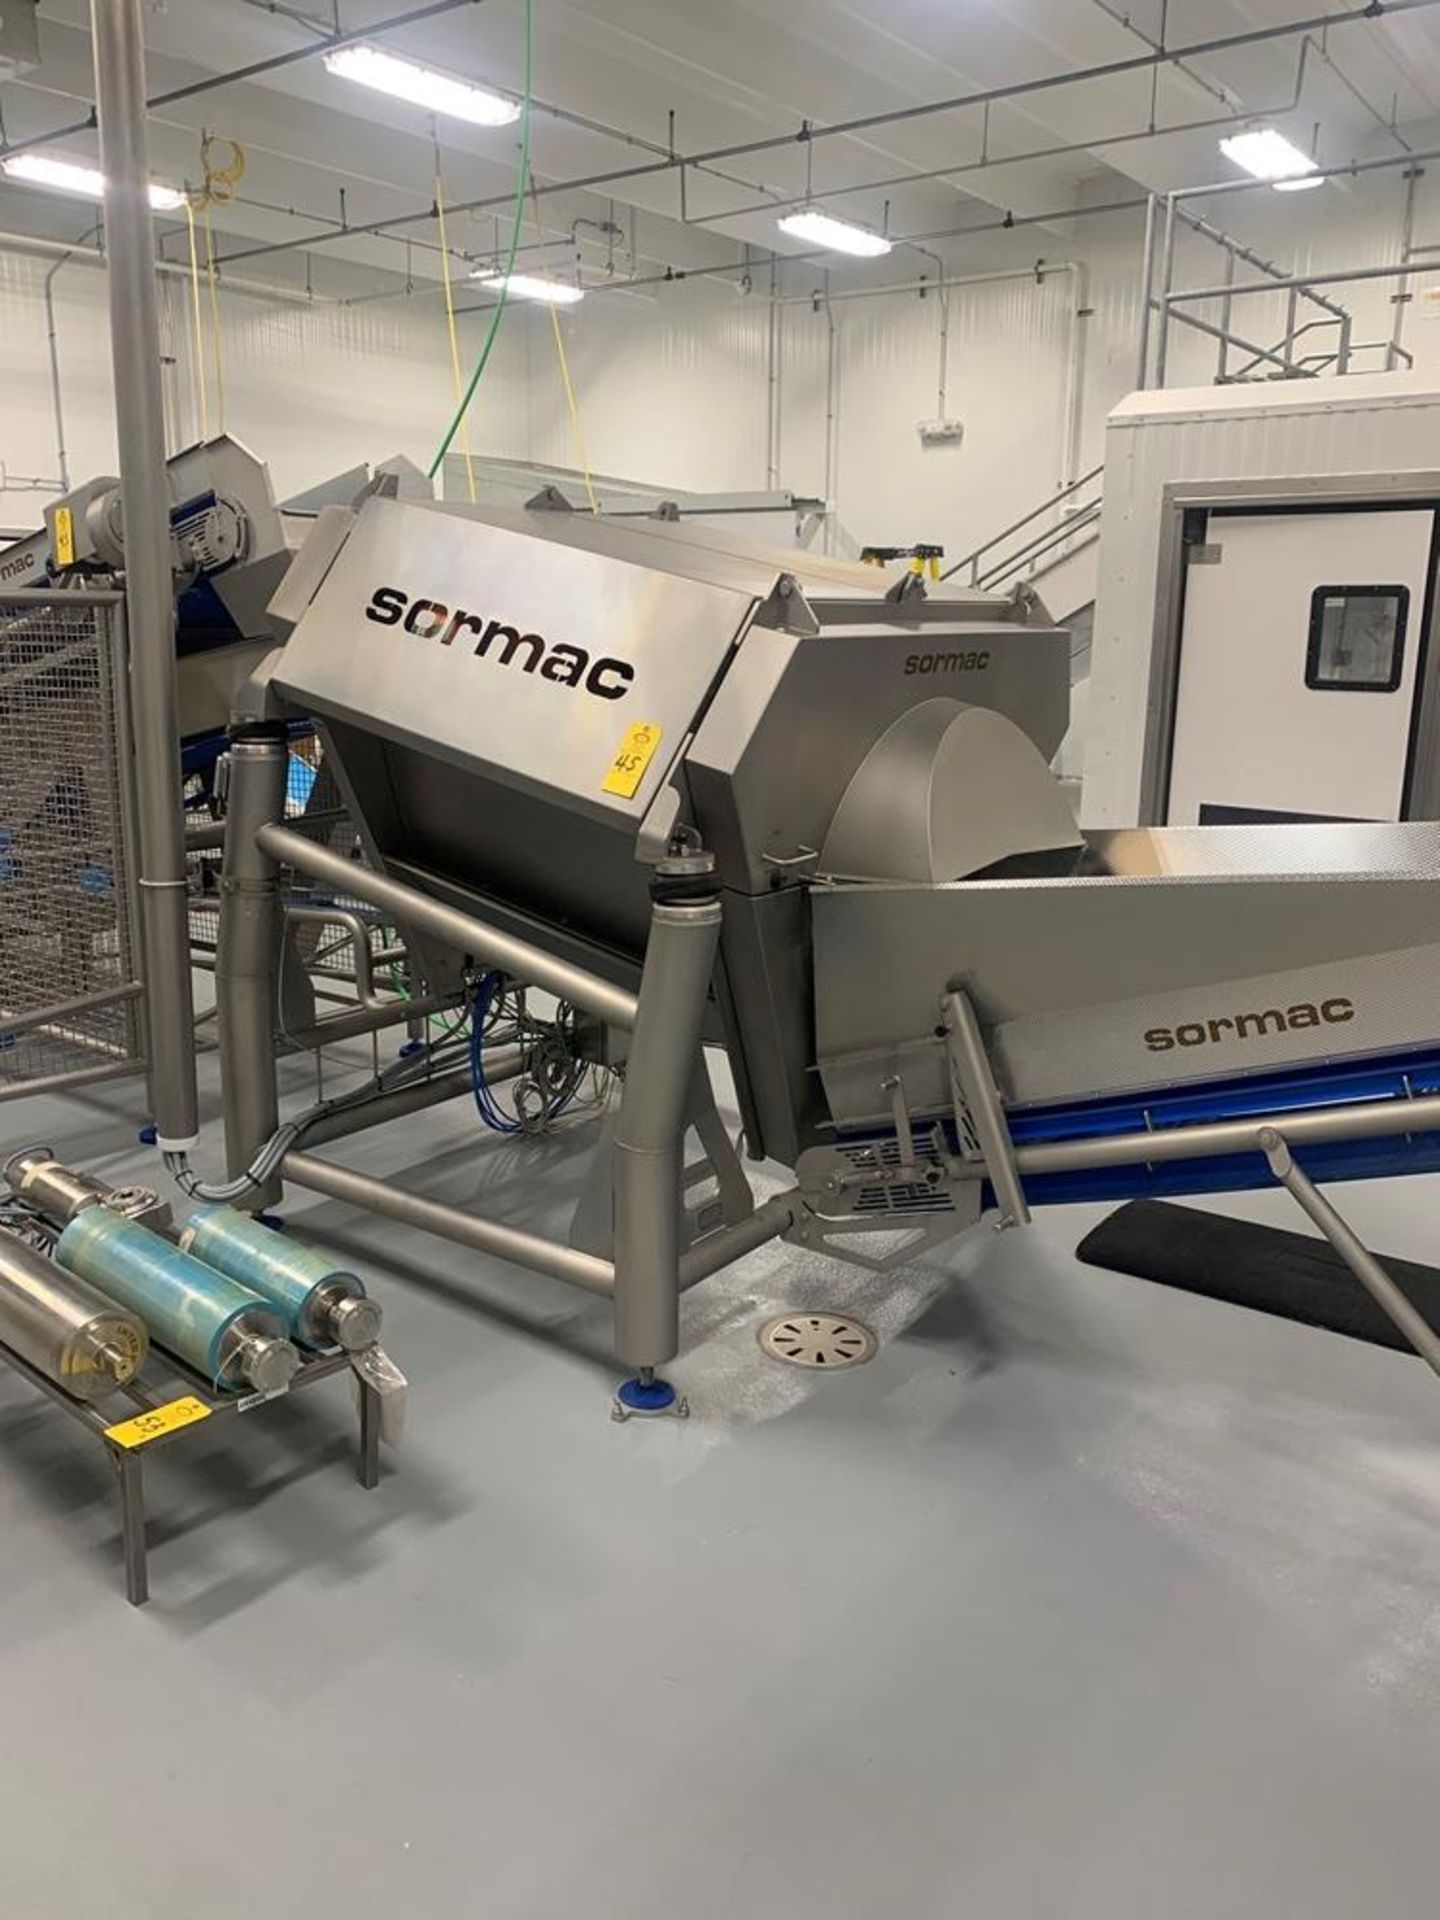 Sormac Cleaning and Drying System, Sormac Mdl. 180950/10S-PS 70/50/010 Washing System , Mfg. 2018, - Image 3 of 41